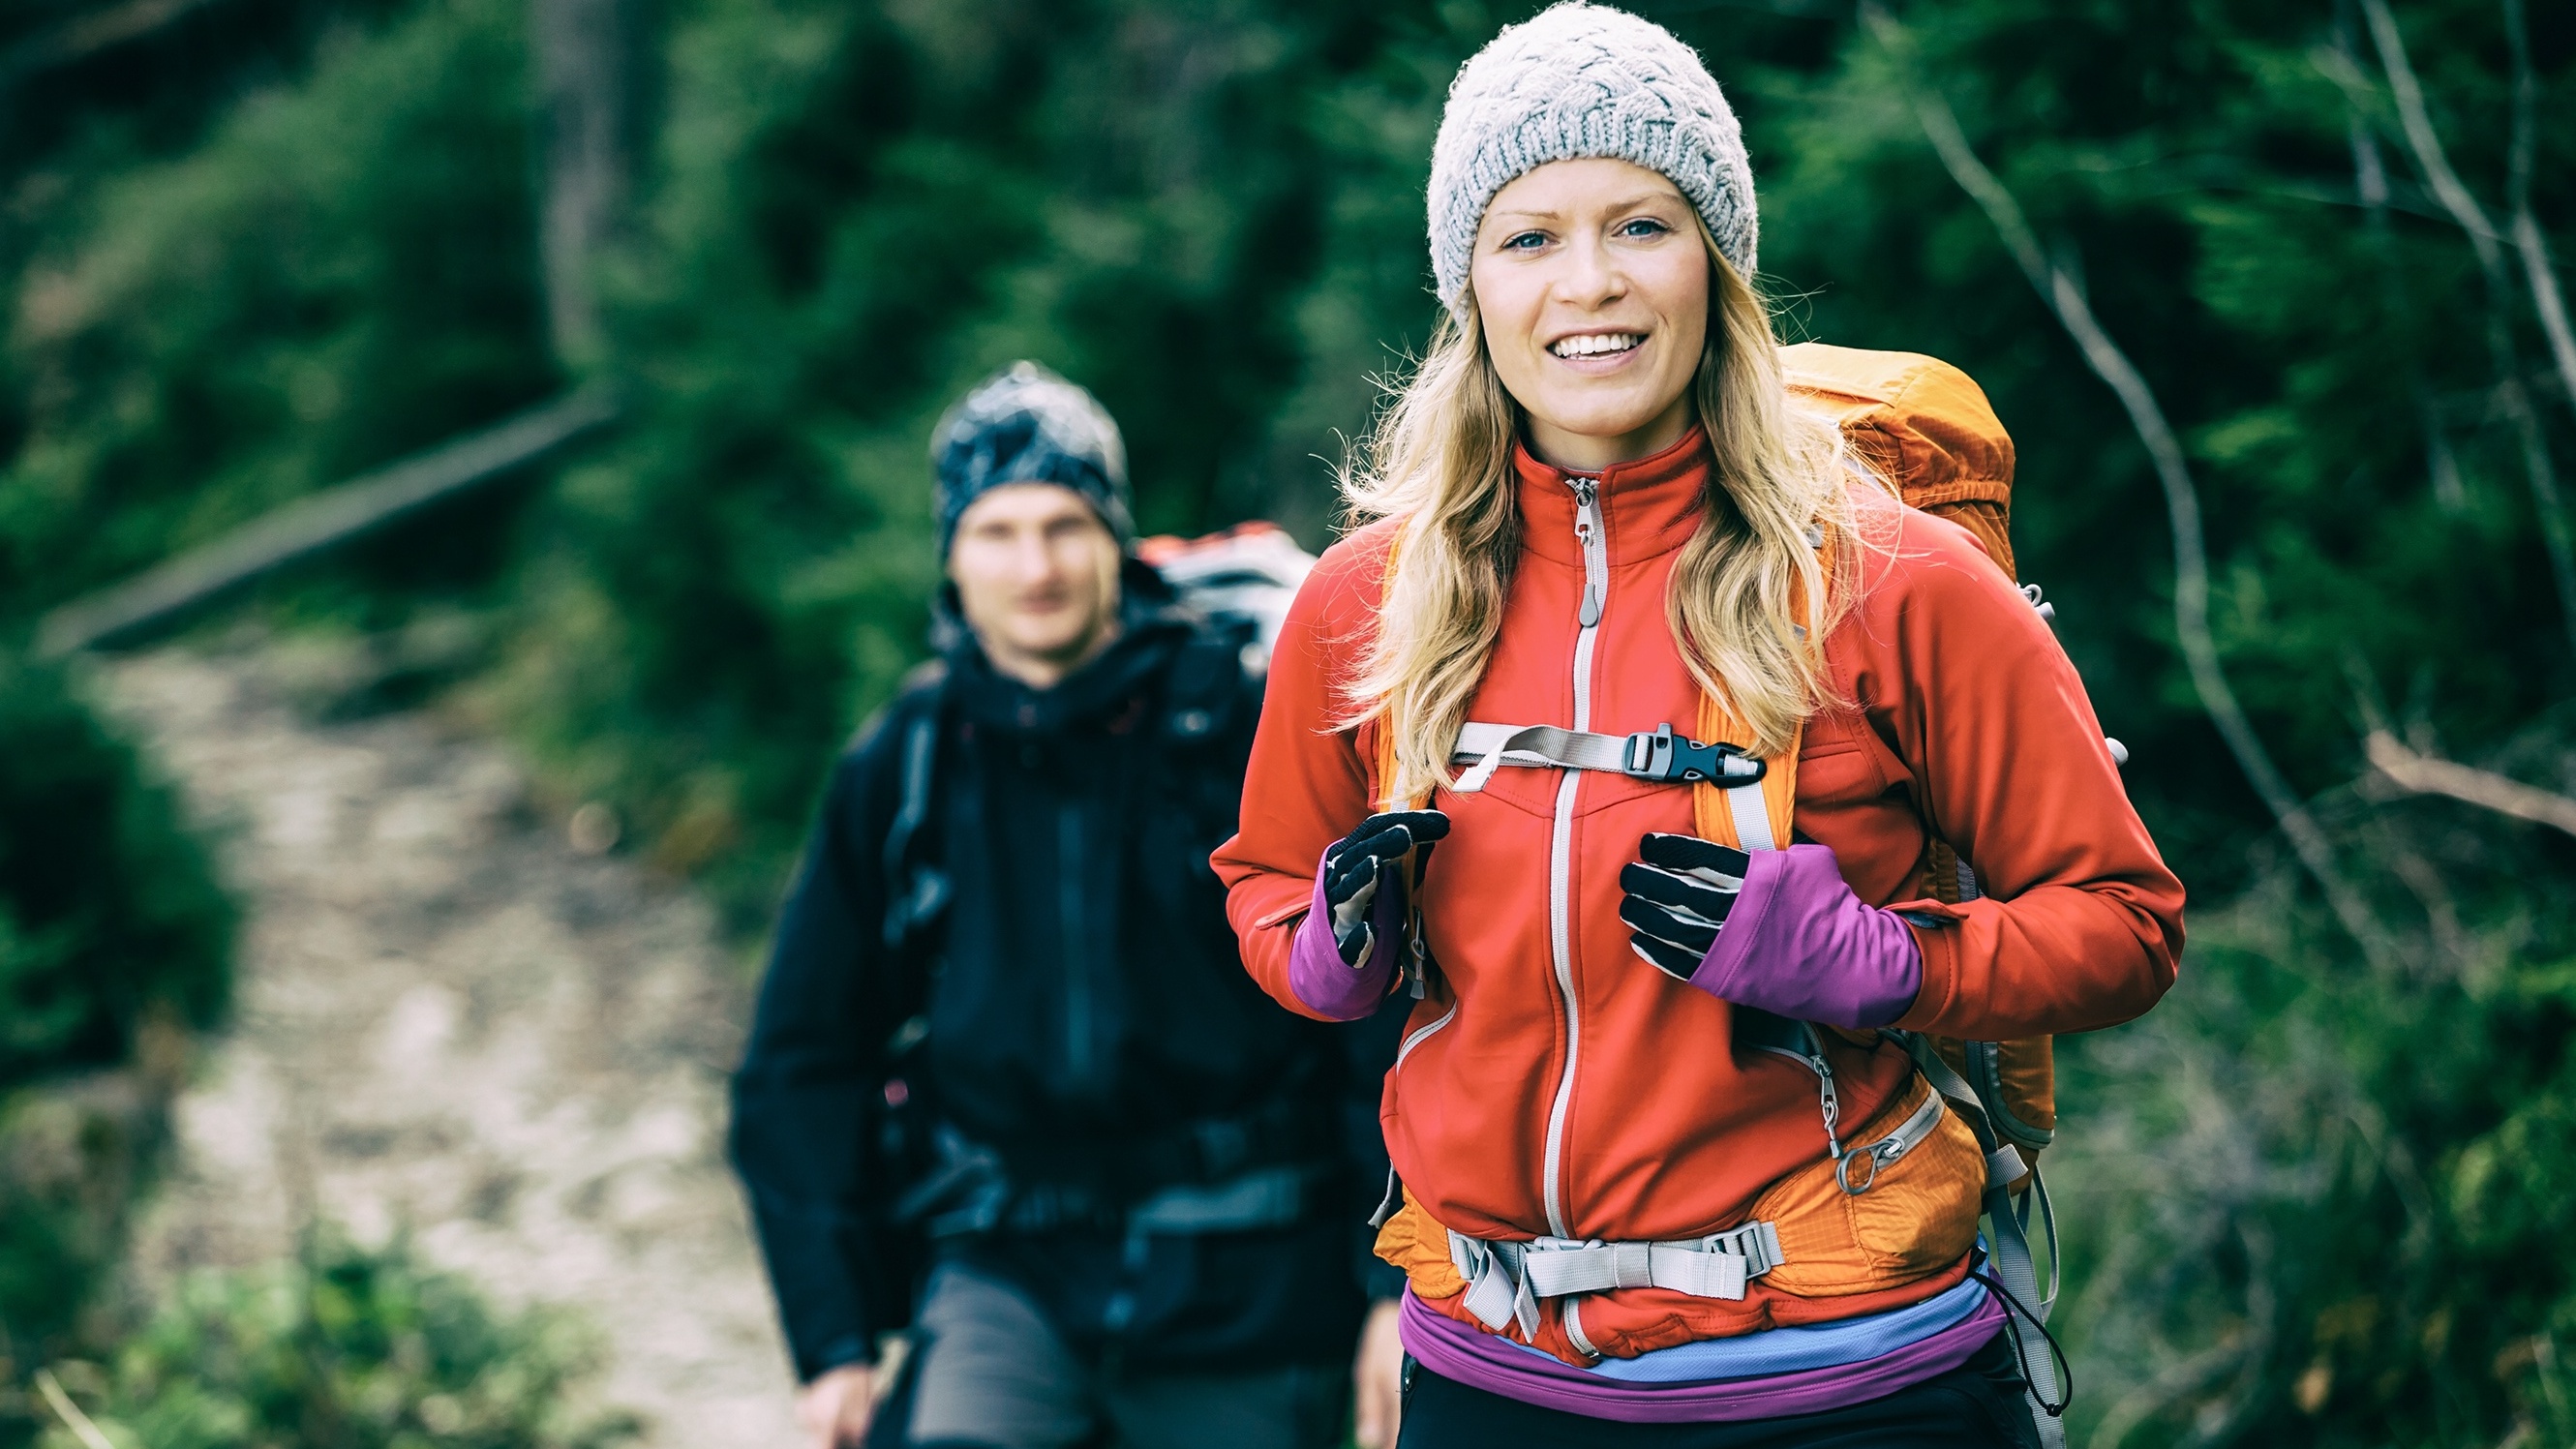 Generic photo of a man and woman going for a hike (Thinkstock/PA)